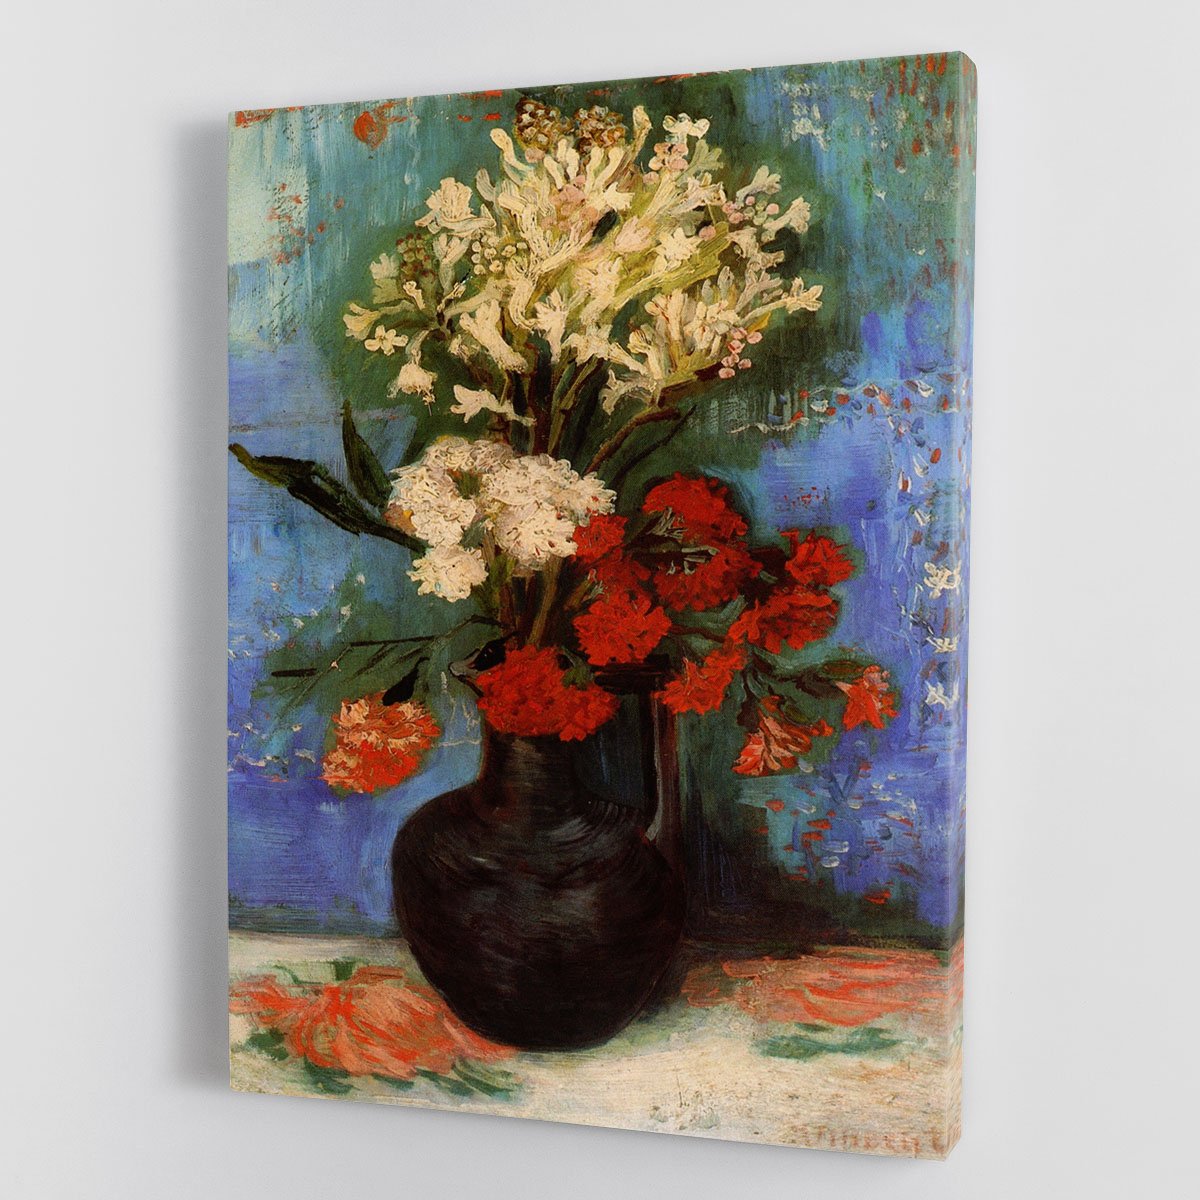 Vase with Carnations and Other Flowers by Van Gogh Canvas Print or Poster